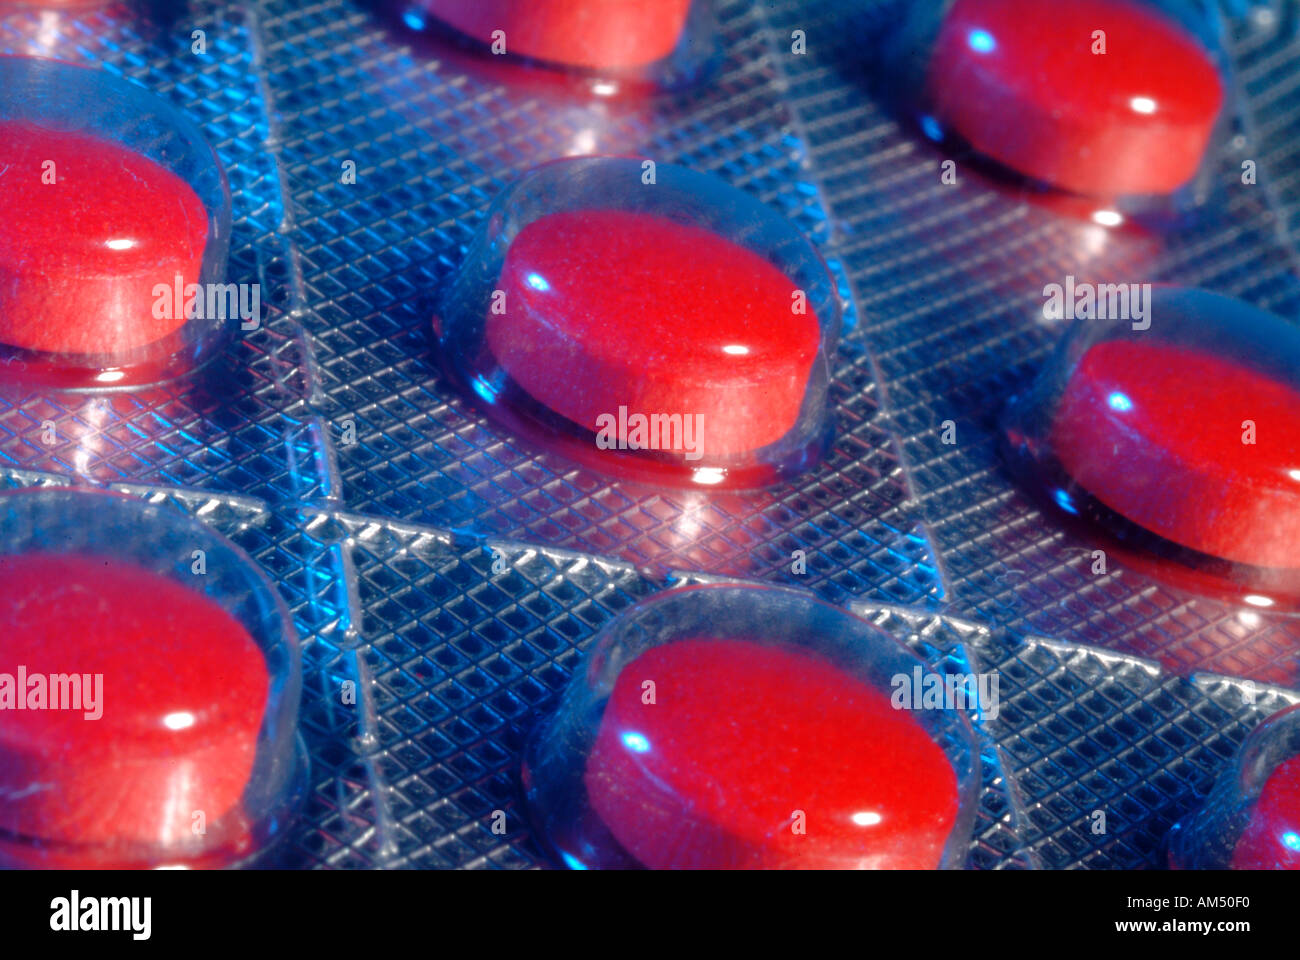 red medicine tablets in a foil blister package Stock Photo